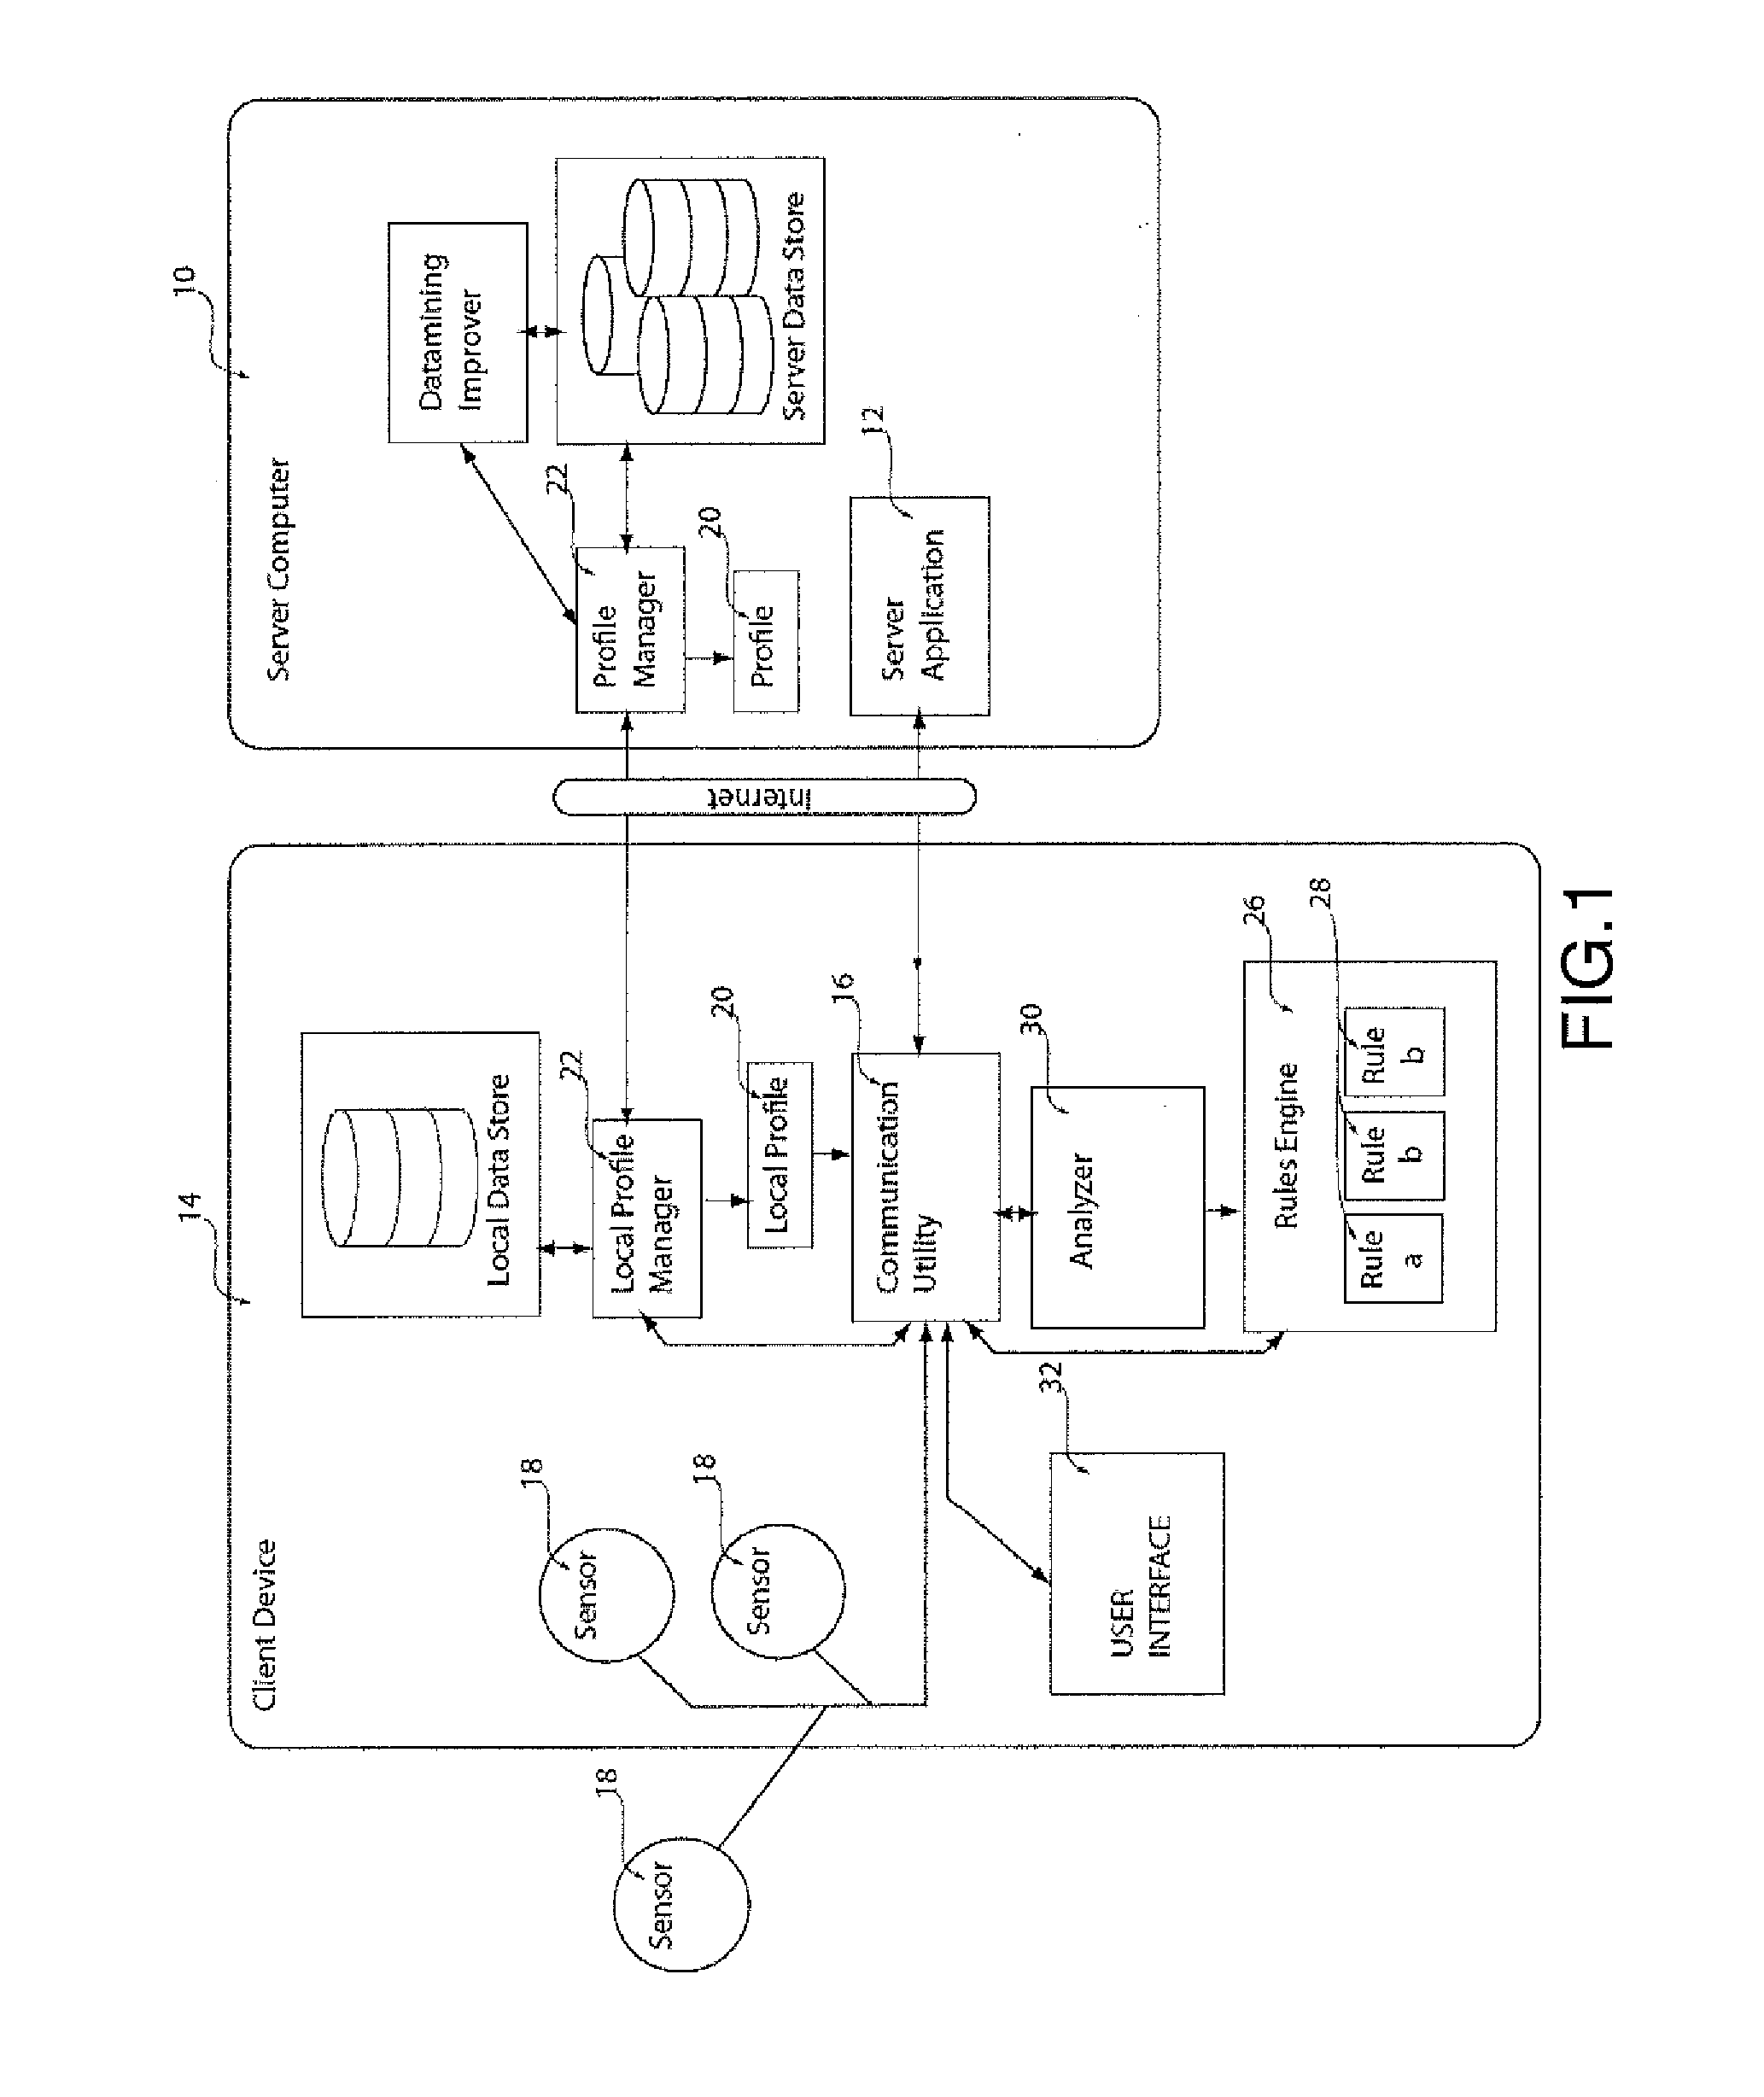 System and method for enhancing content using brain-state data